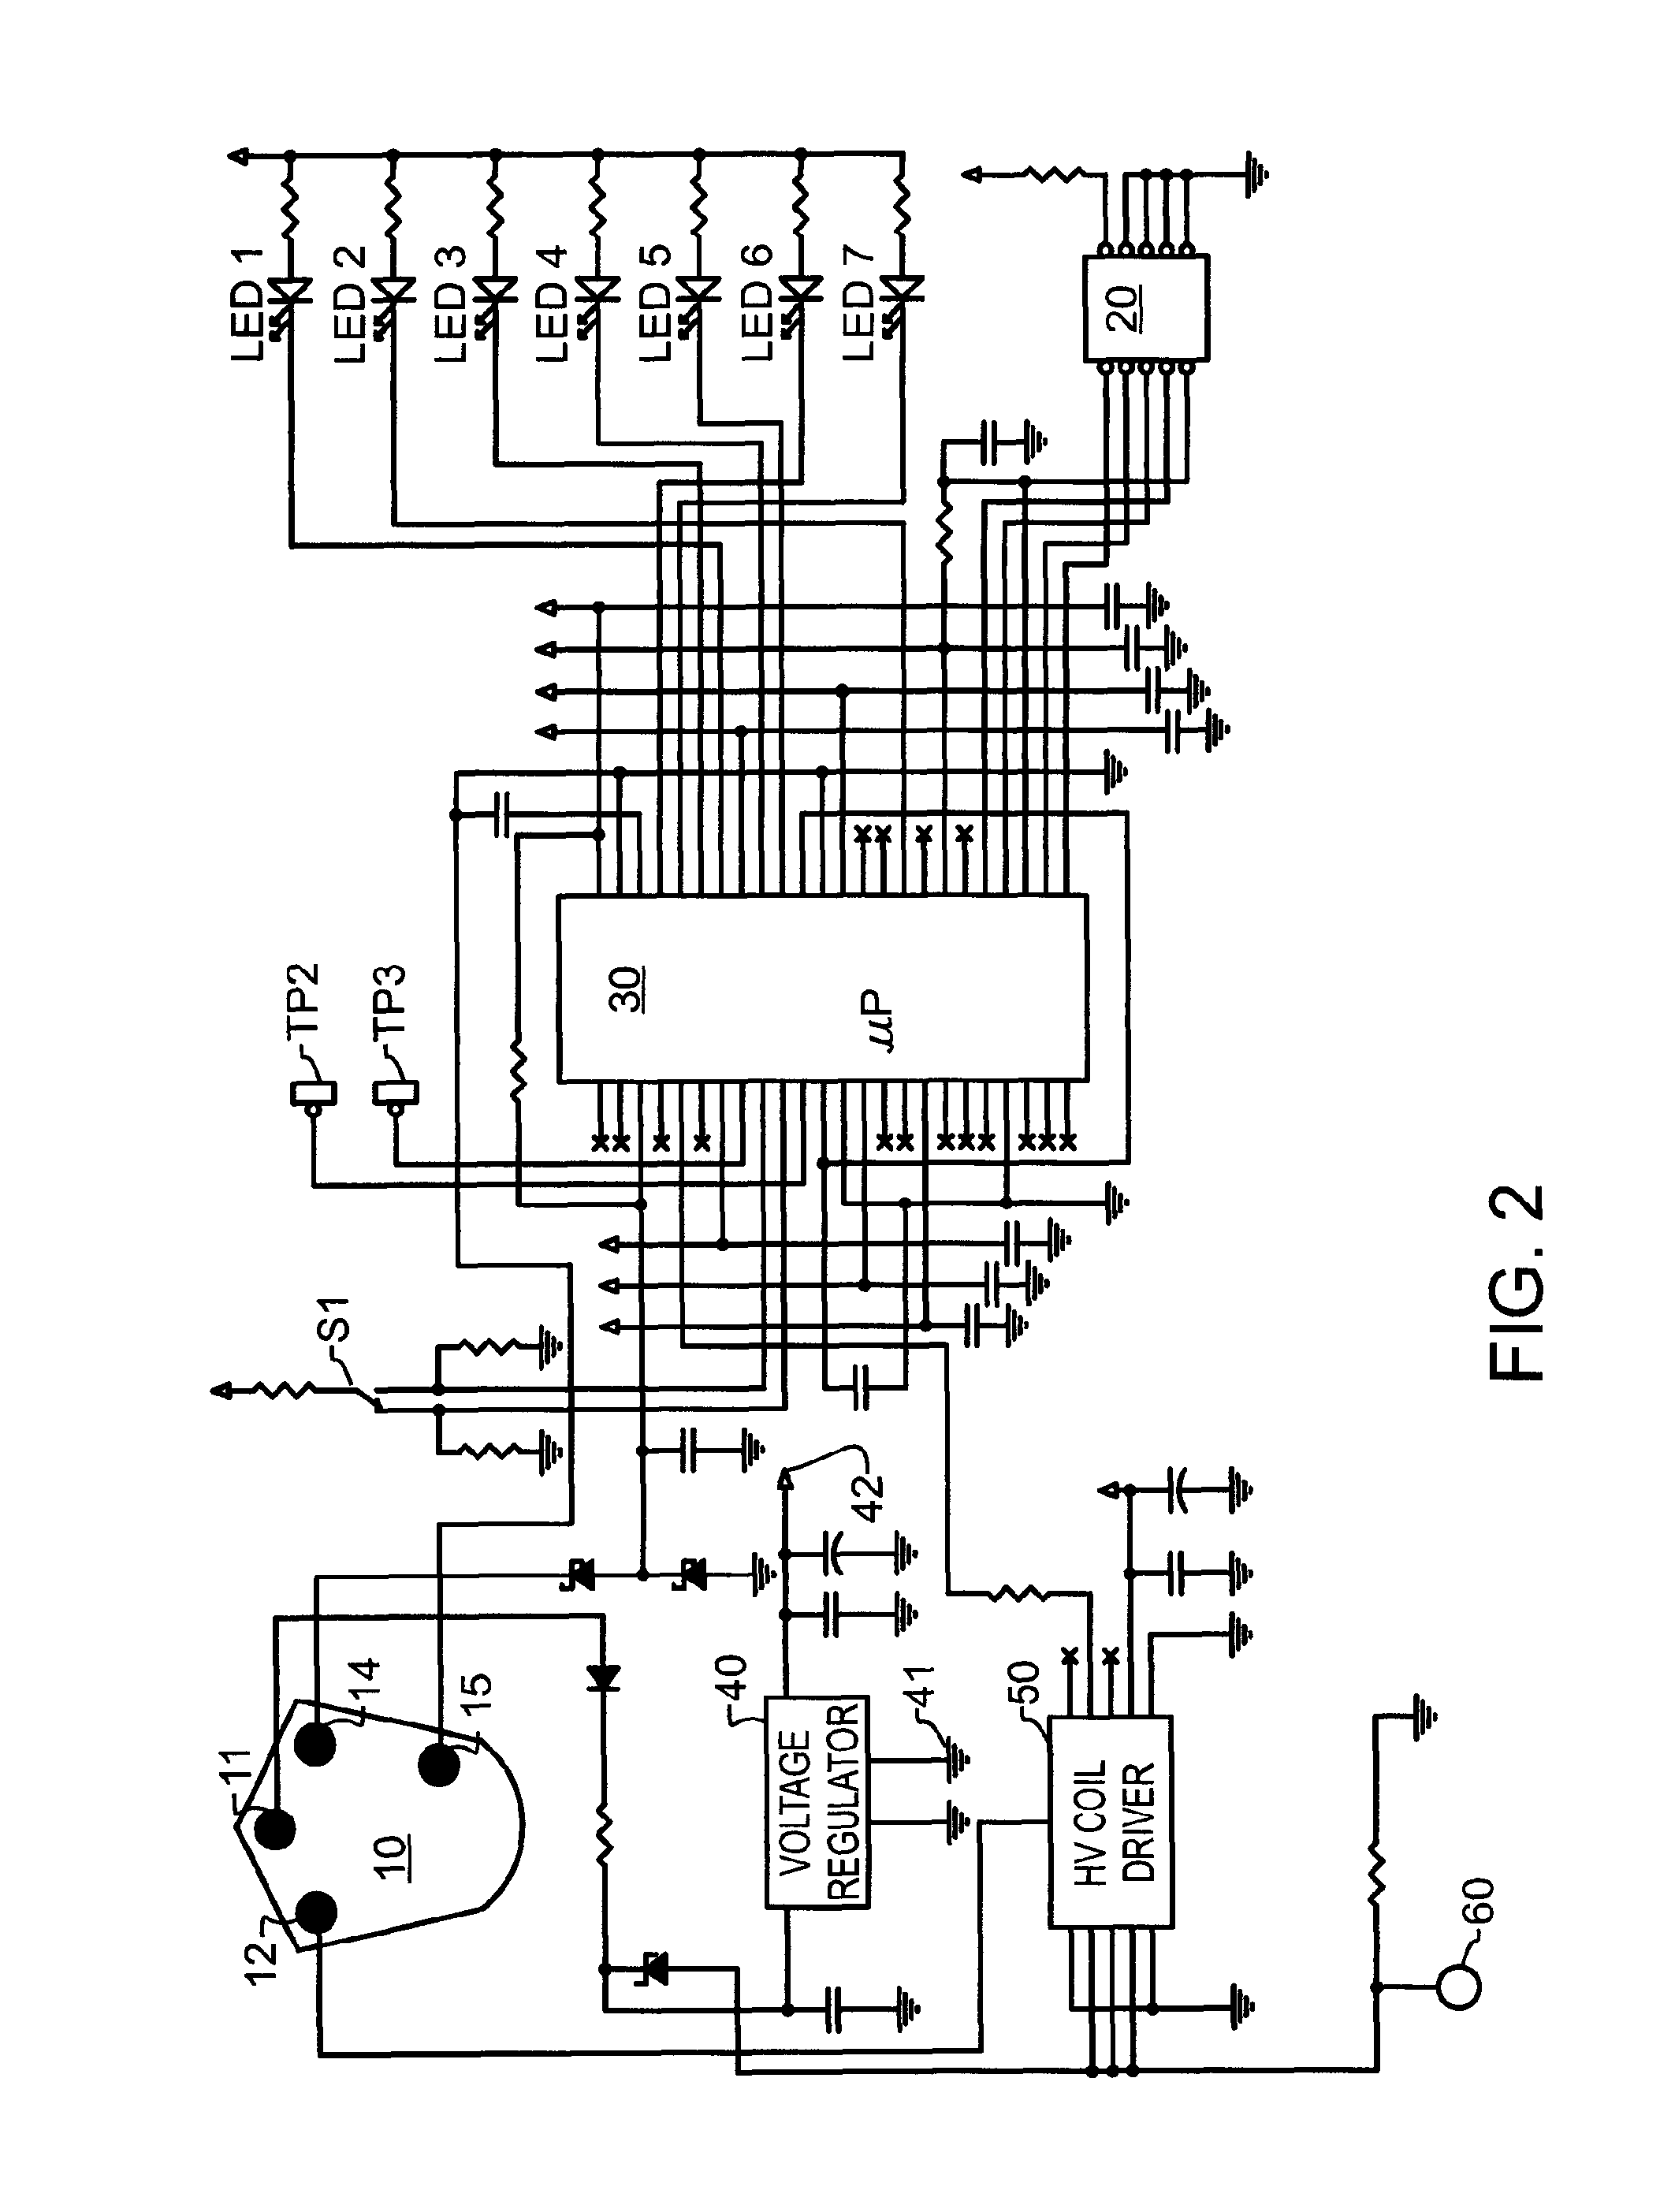 Electronic ignition module with rev limiting